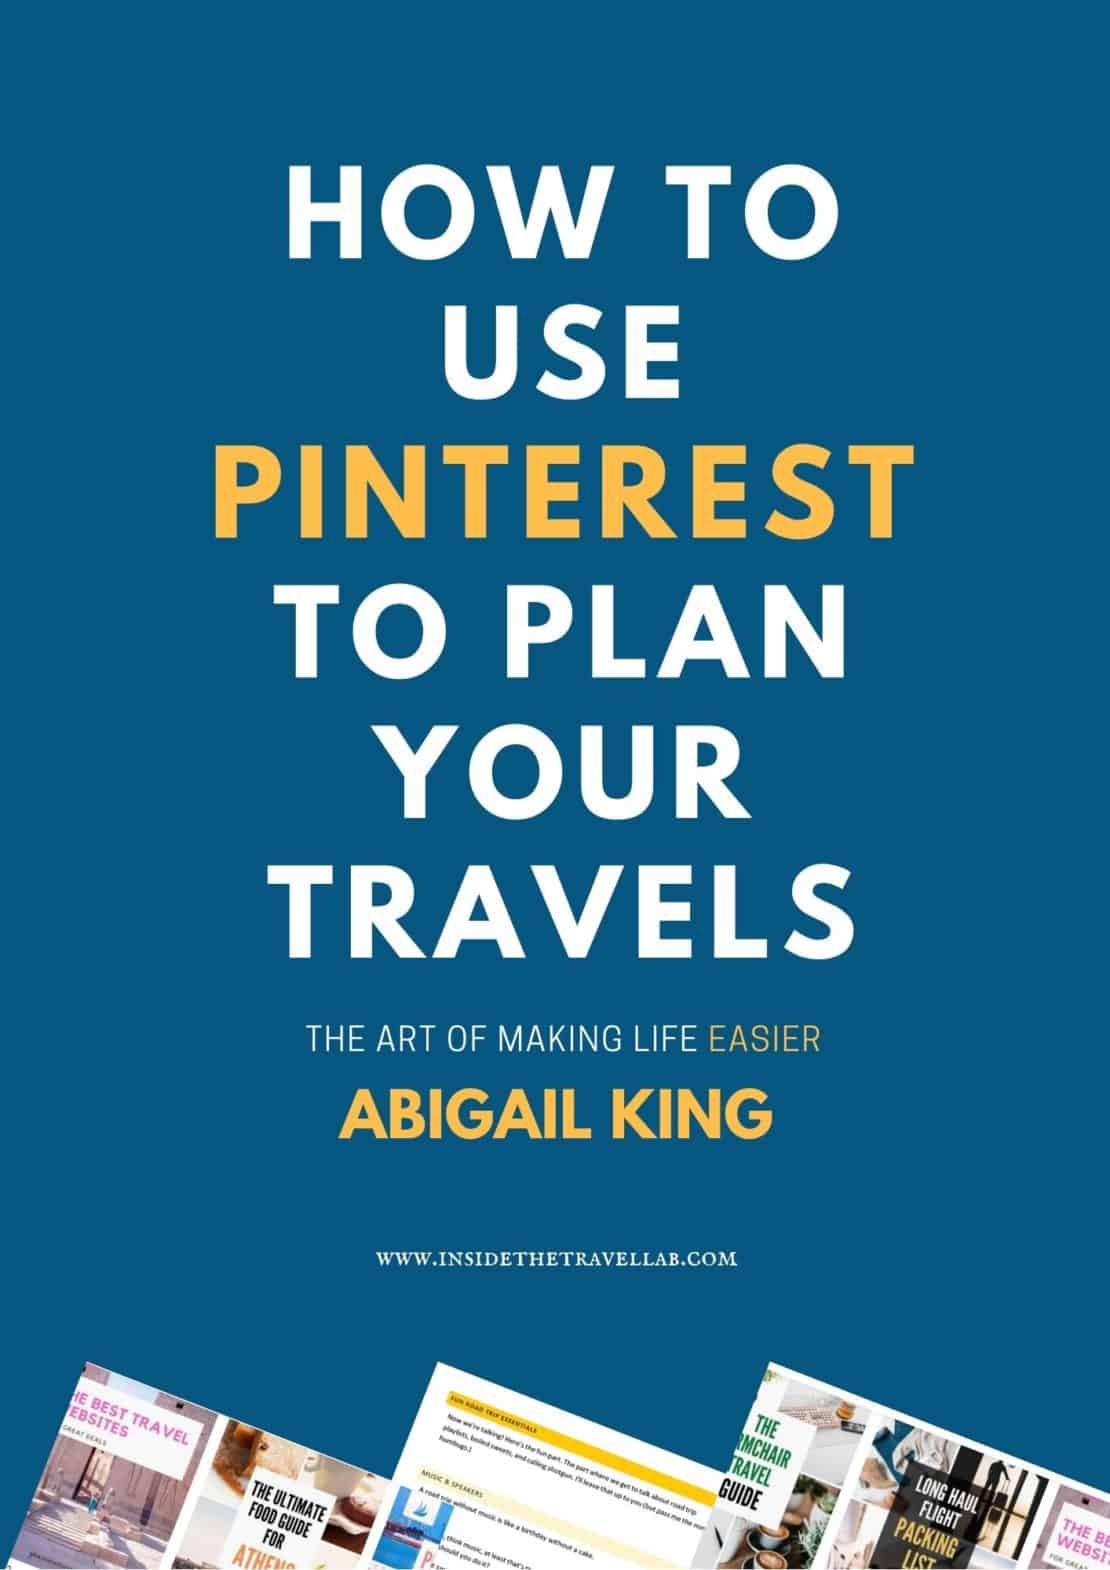 How to use Pinterest to plan your travels